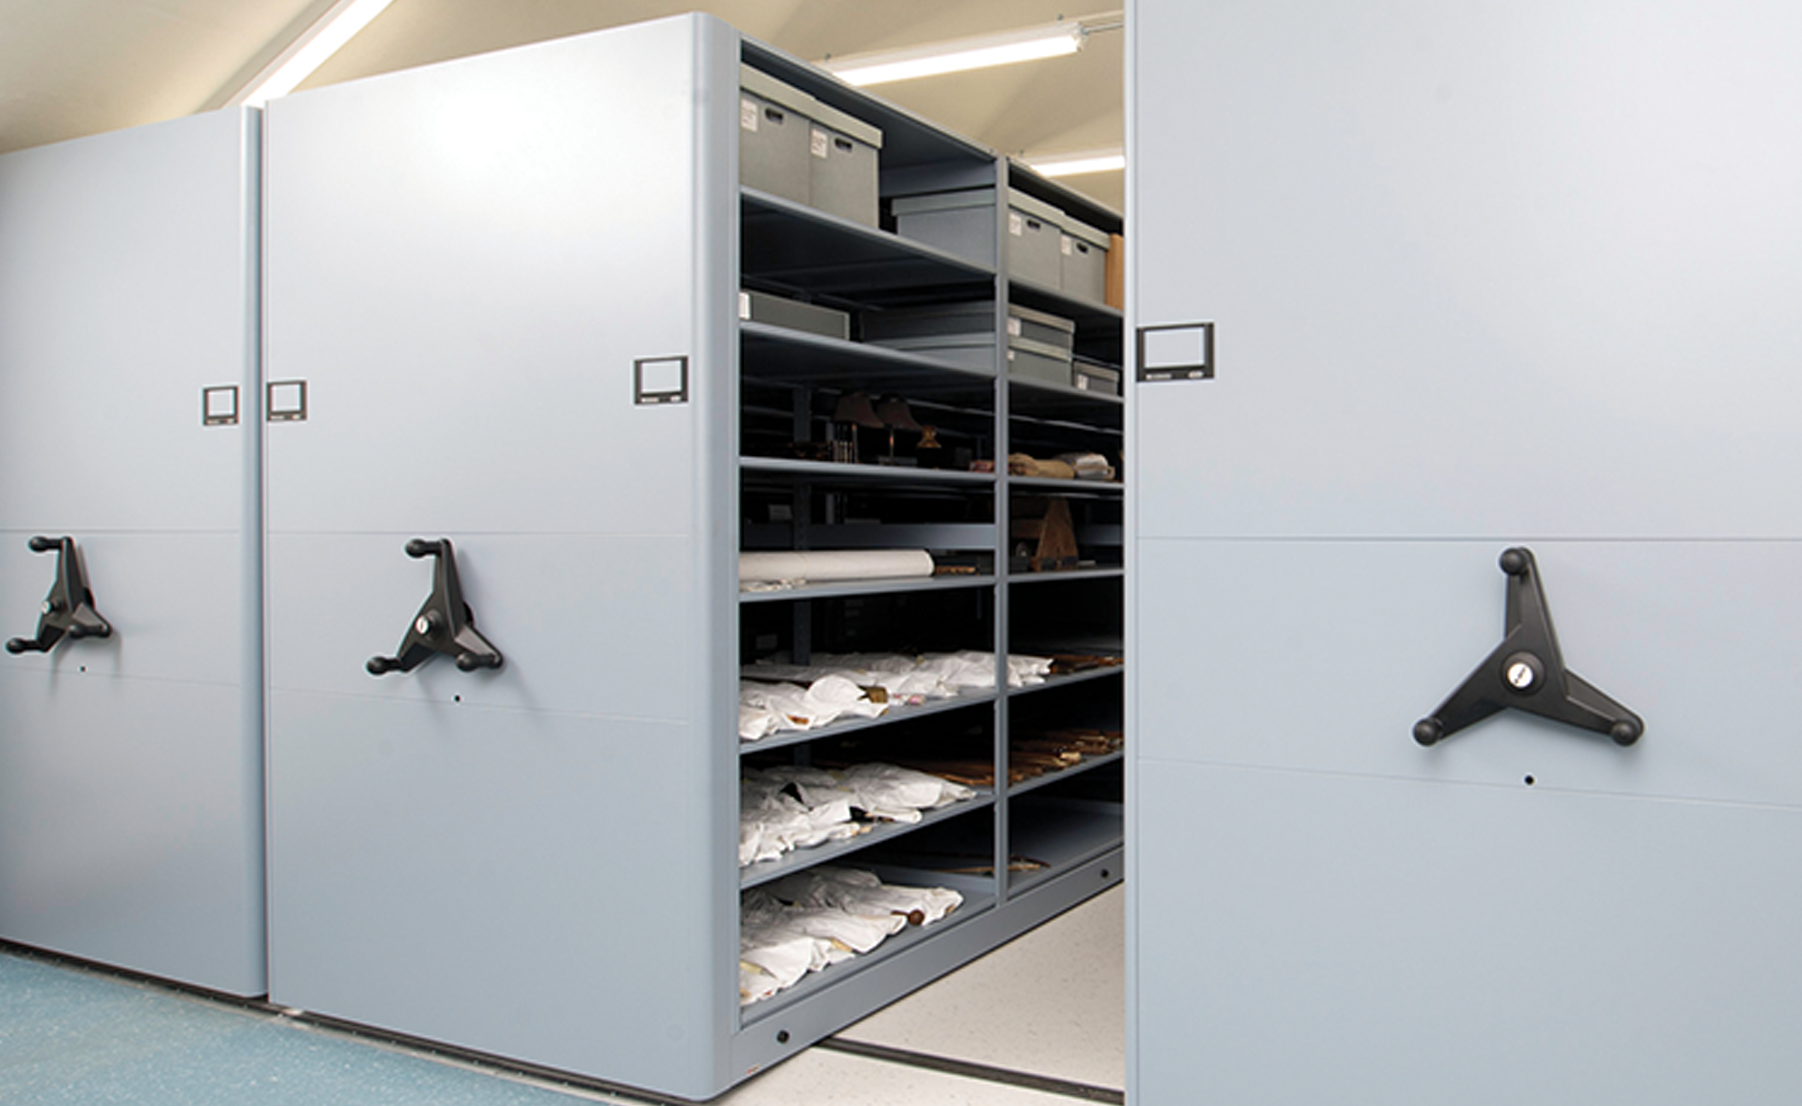 The Art Storage System is for storing collections of art. Made for